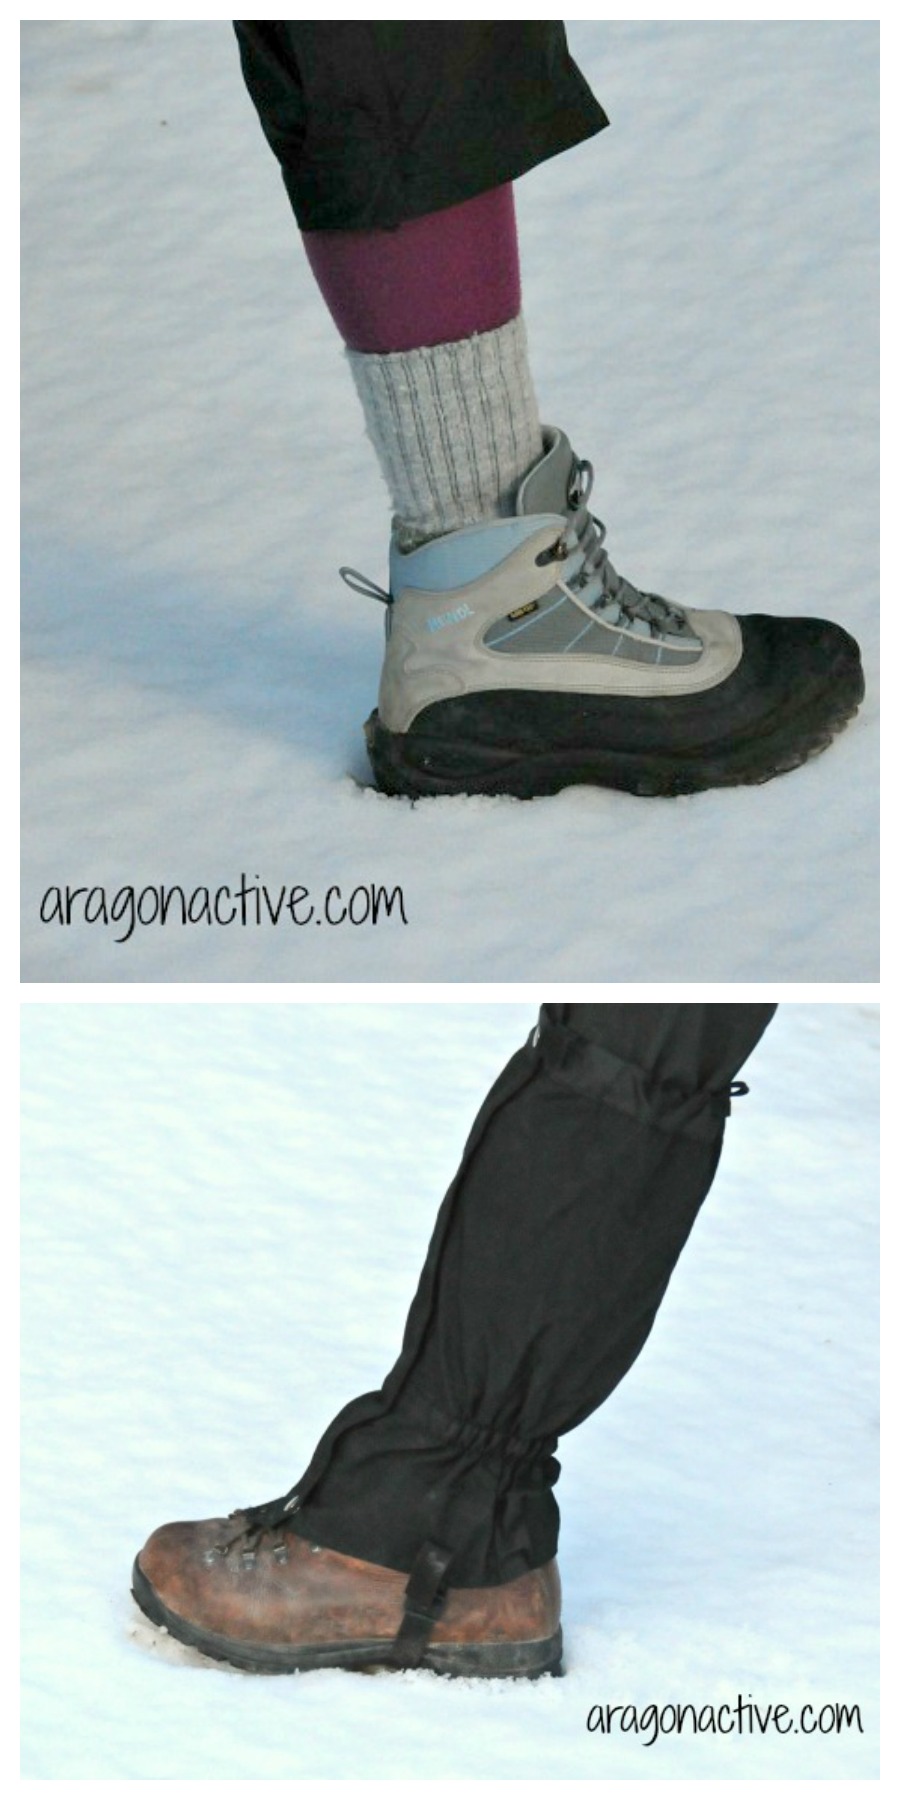 Photo showing two boots for snowshoeing on What to Wear Snowshoeing